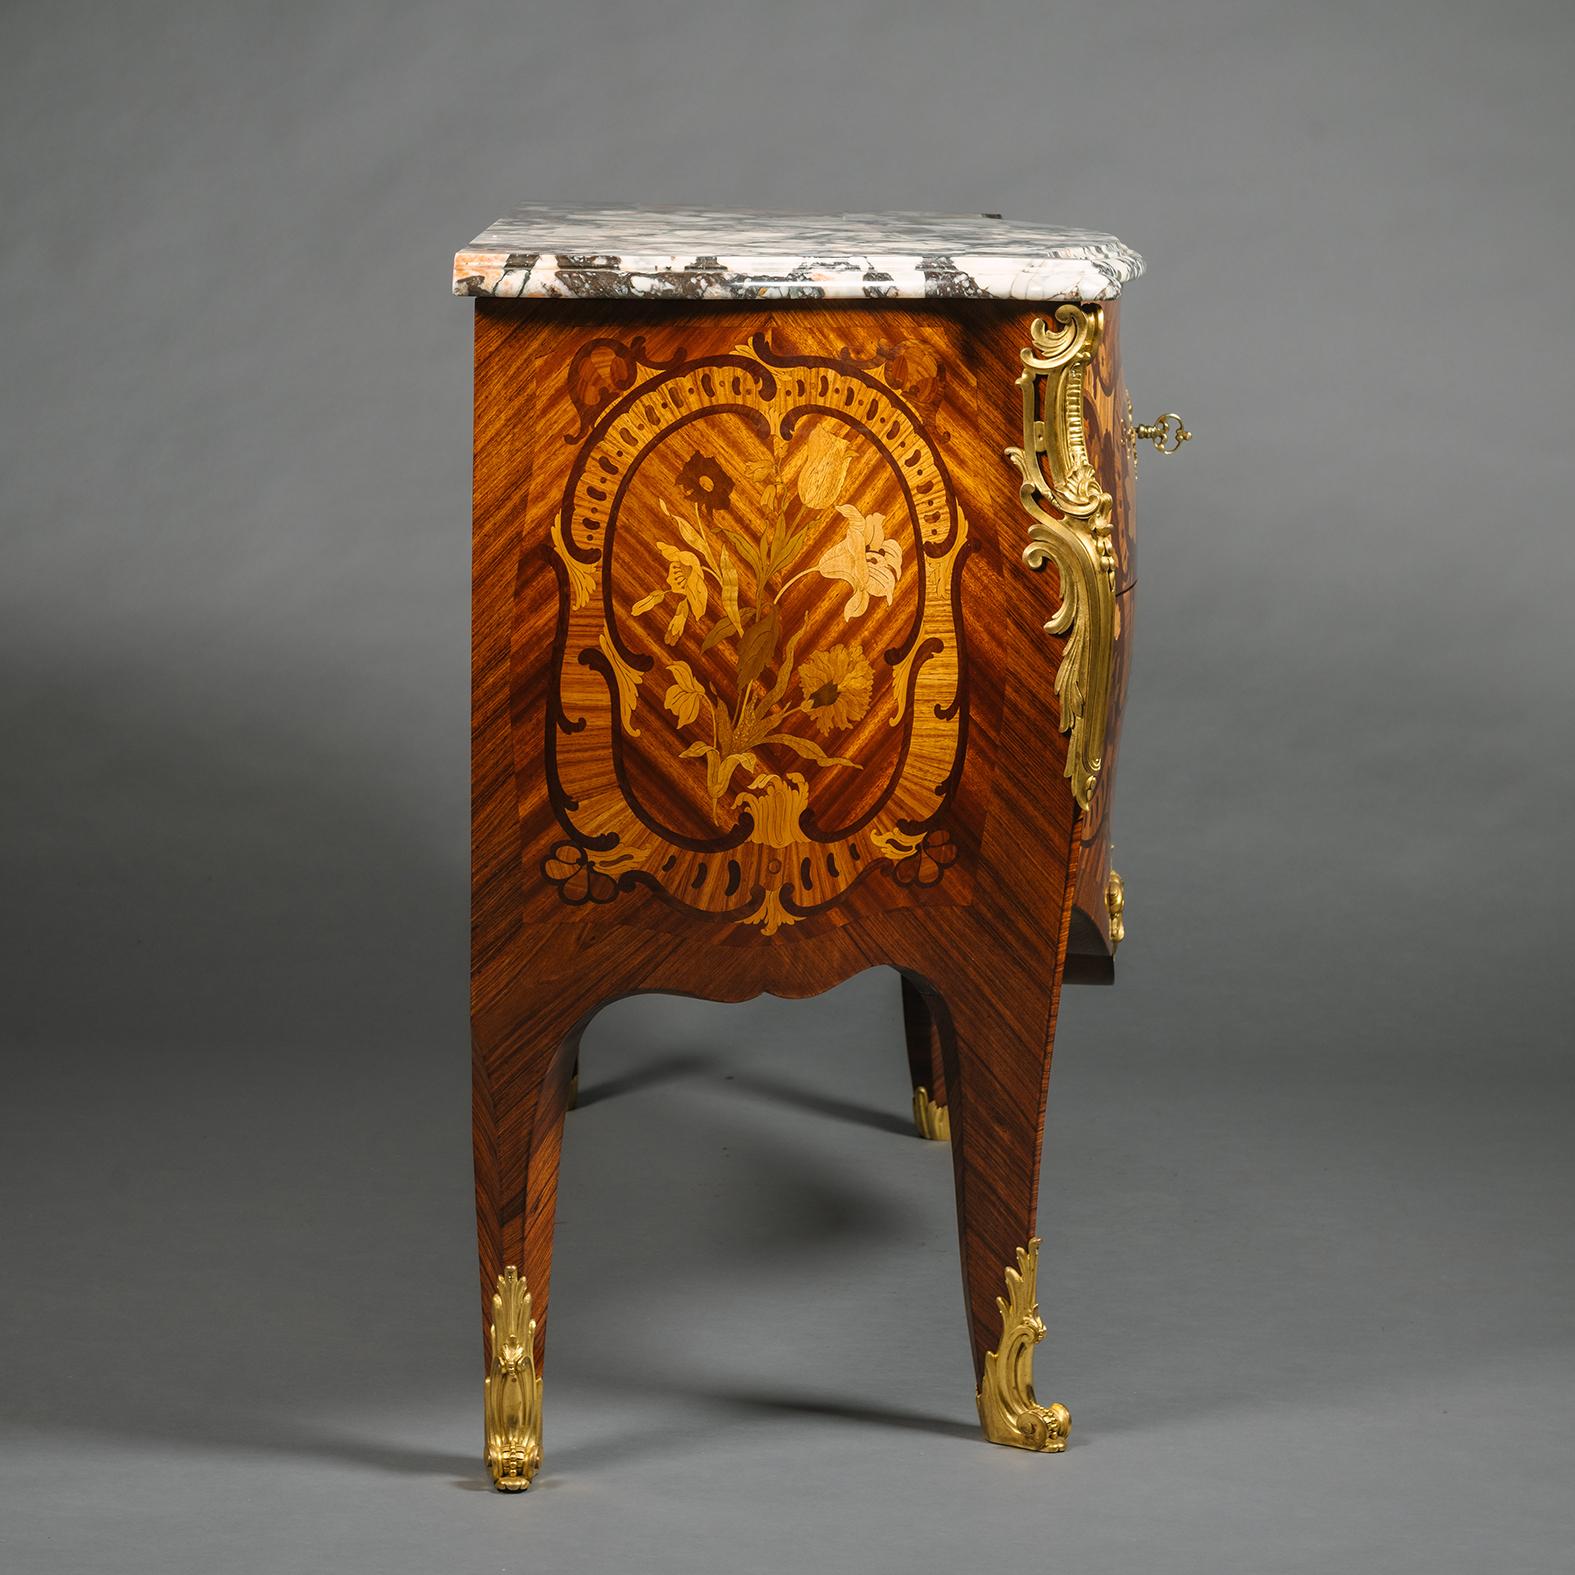 19th Century A Louis XV Style Gilt-Bronze Mounted Marquetry Commode, By Paul Sormani For Sale